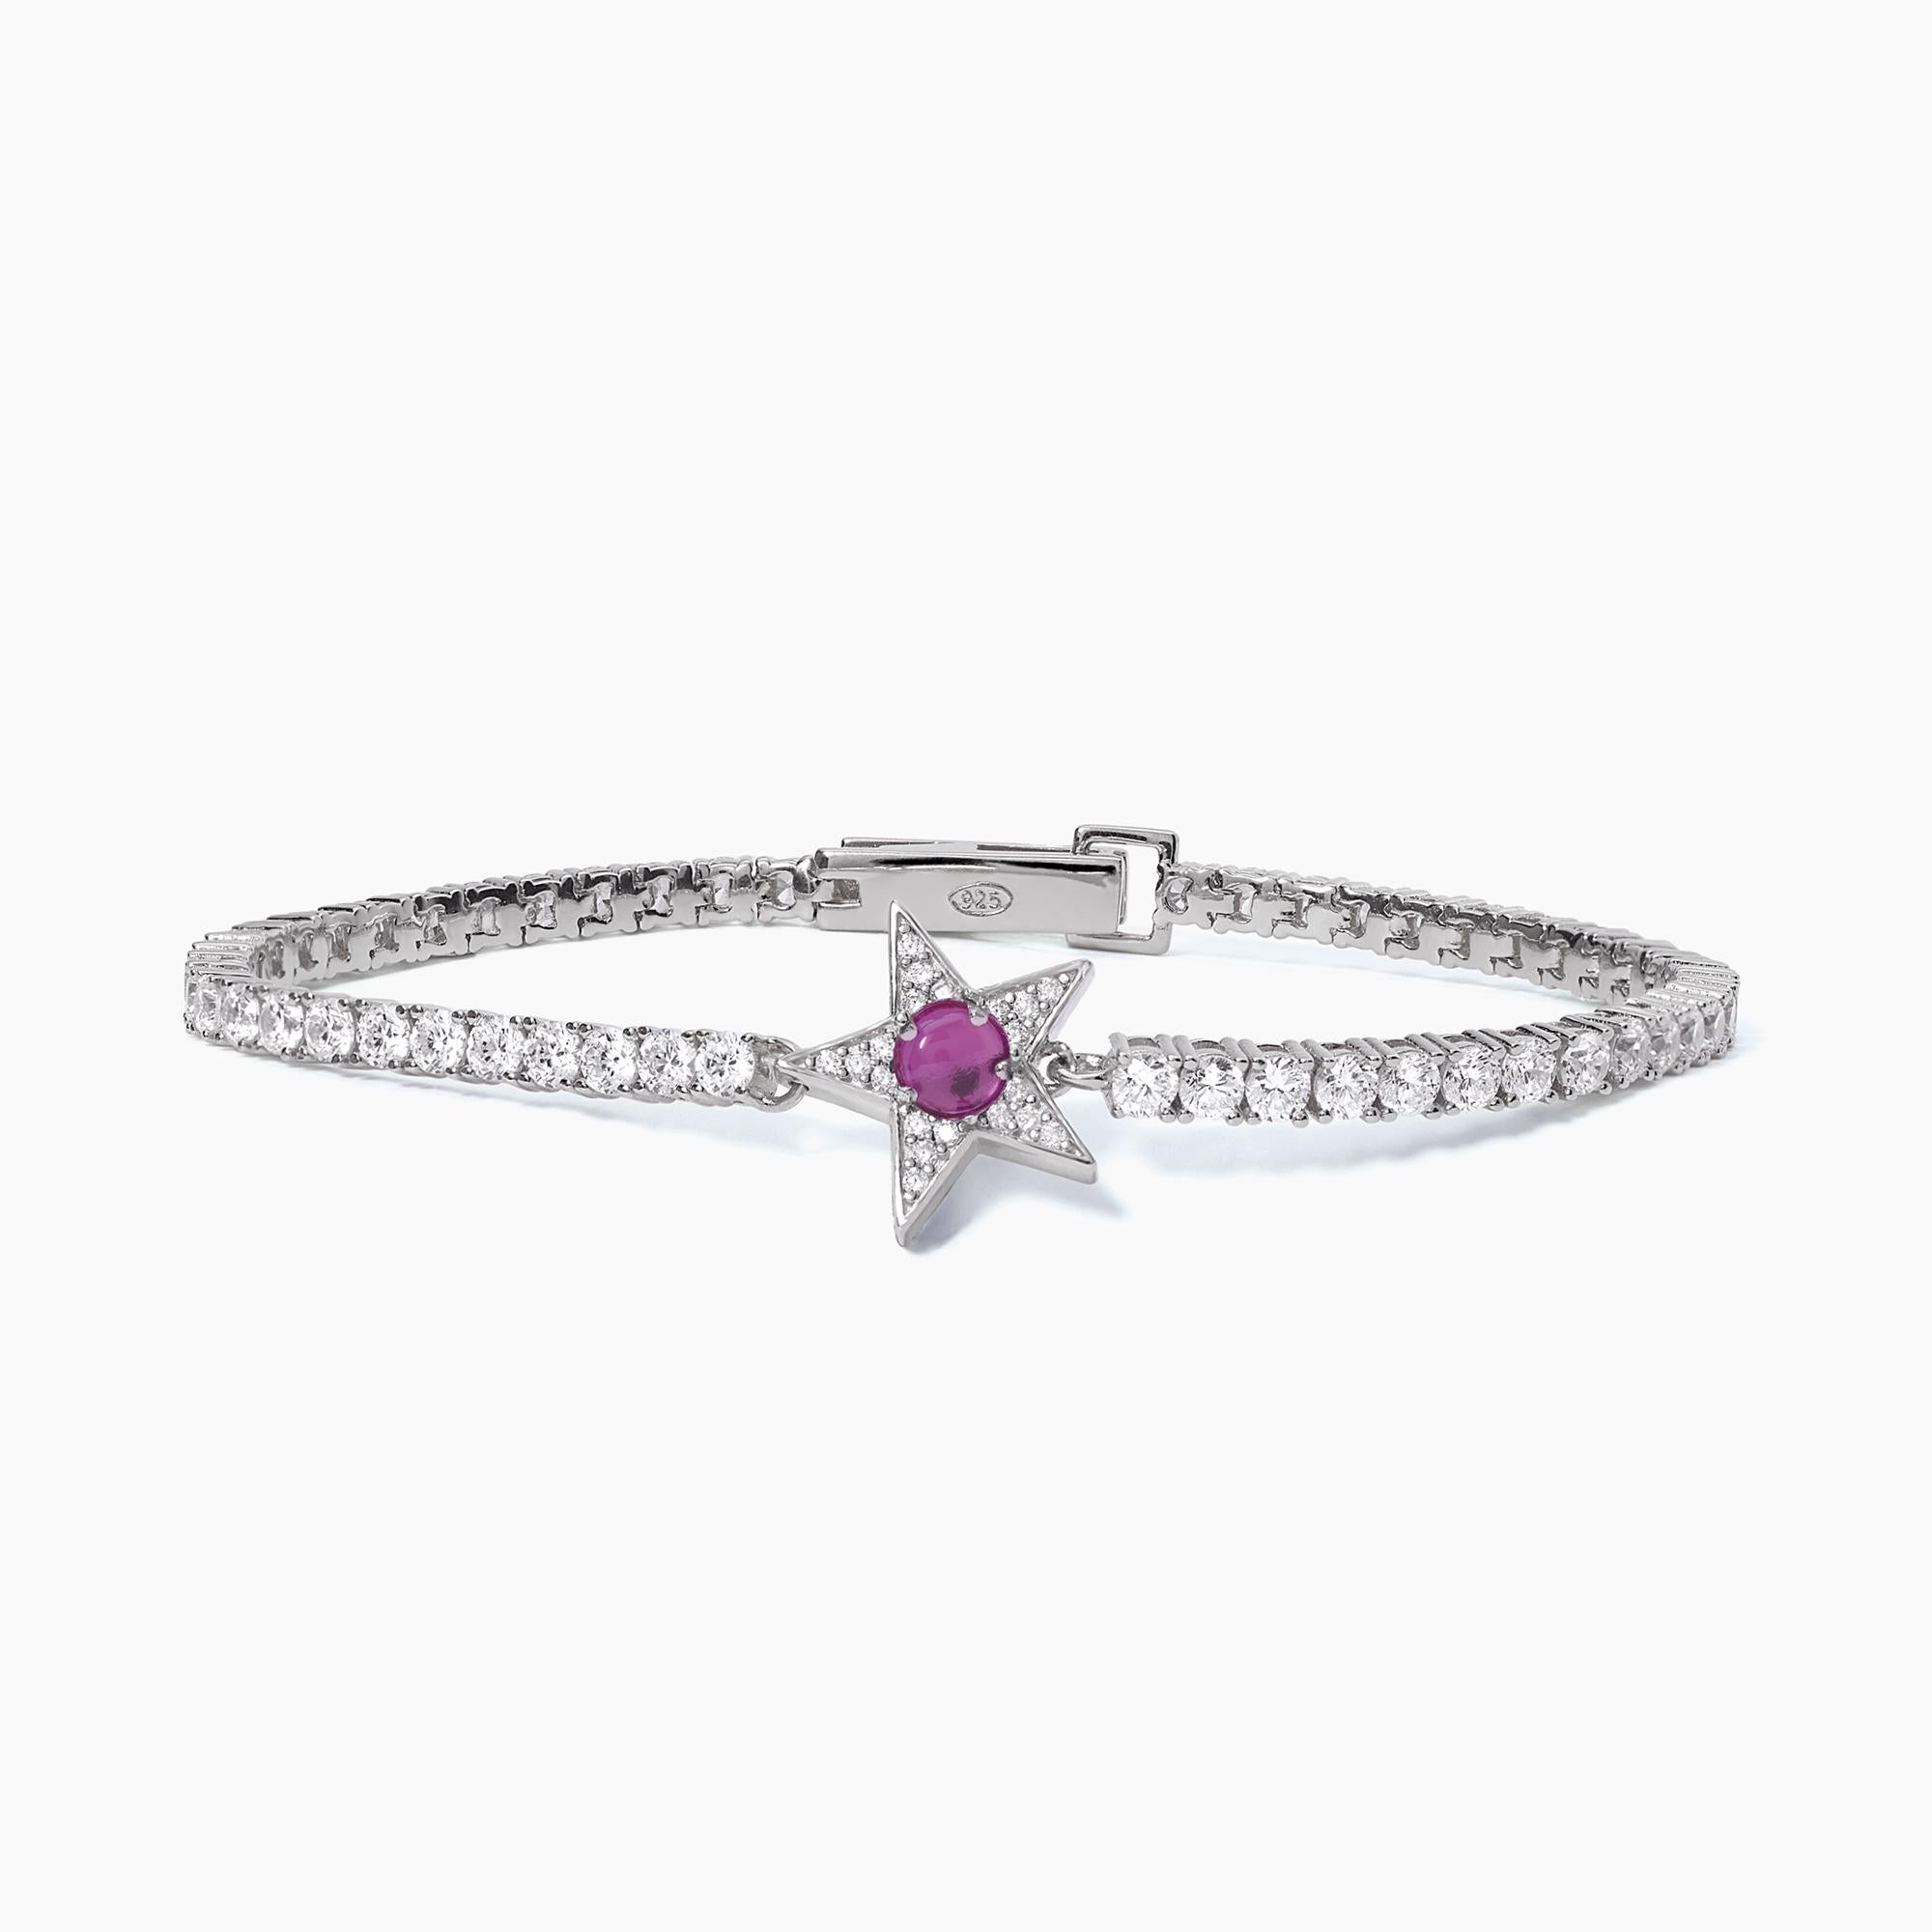 Mabina Woman - Star tennis bracelet with synthetic tourmaline STARLET - 533650-S